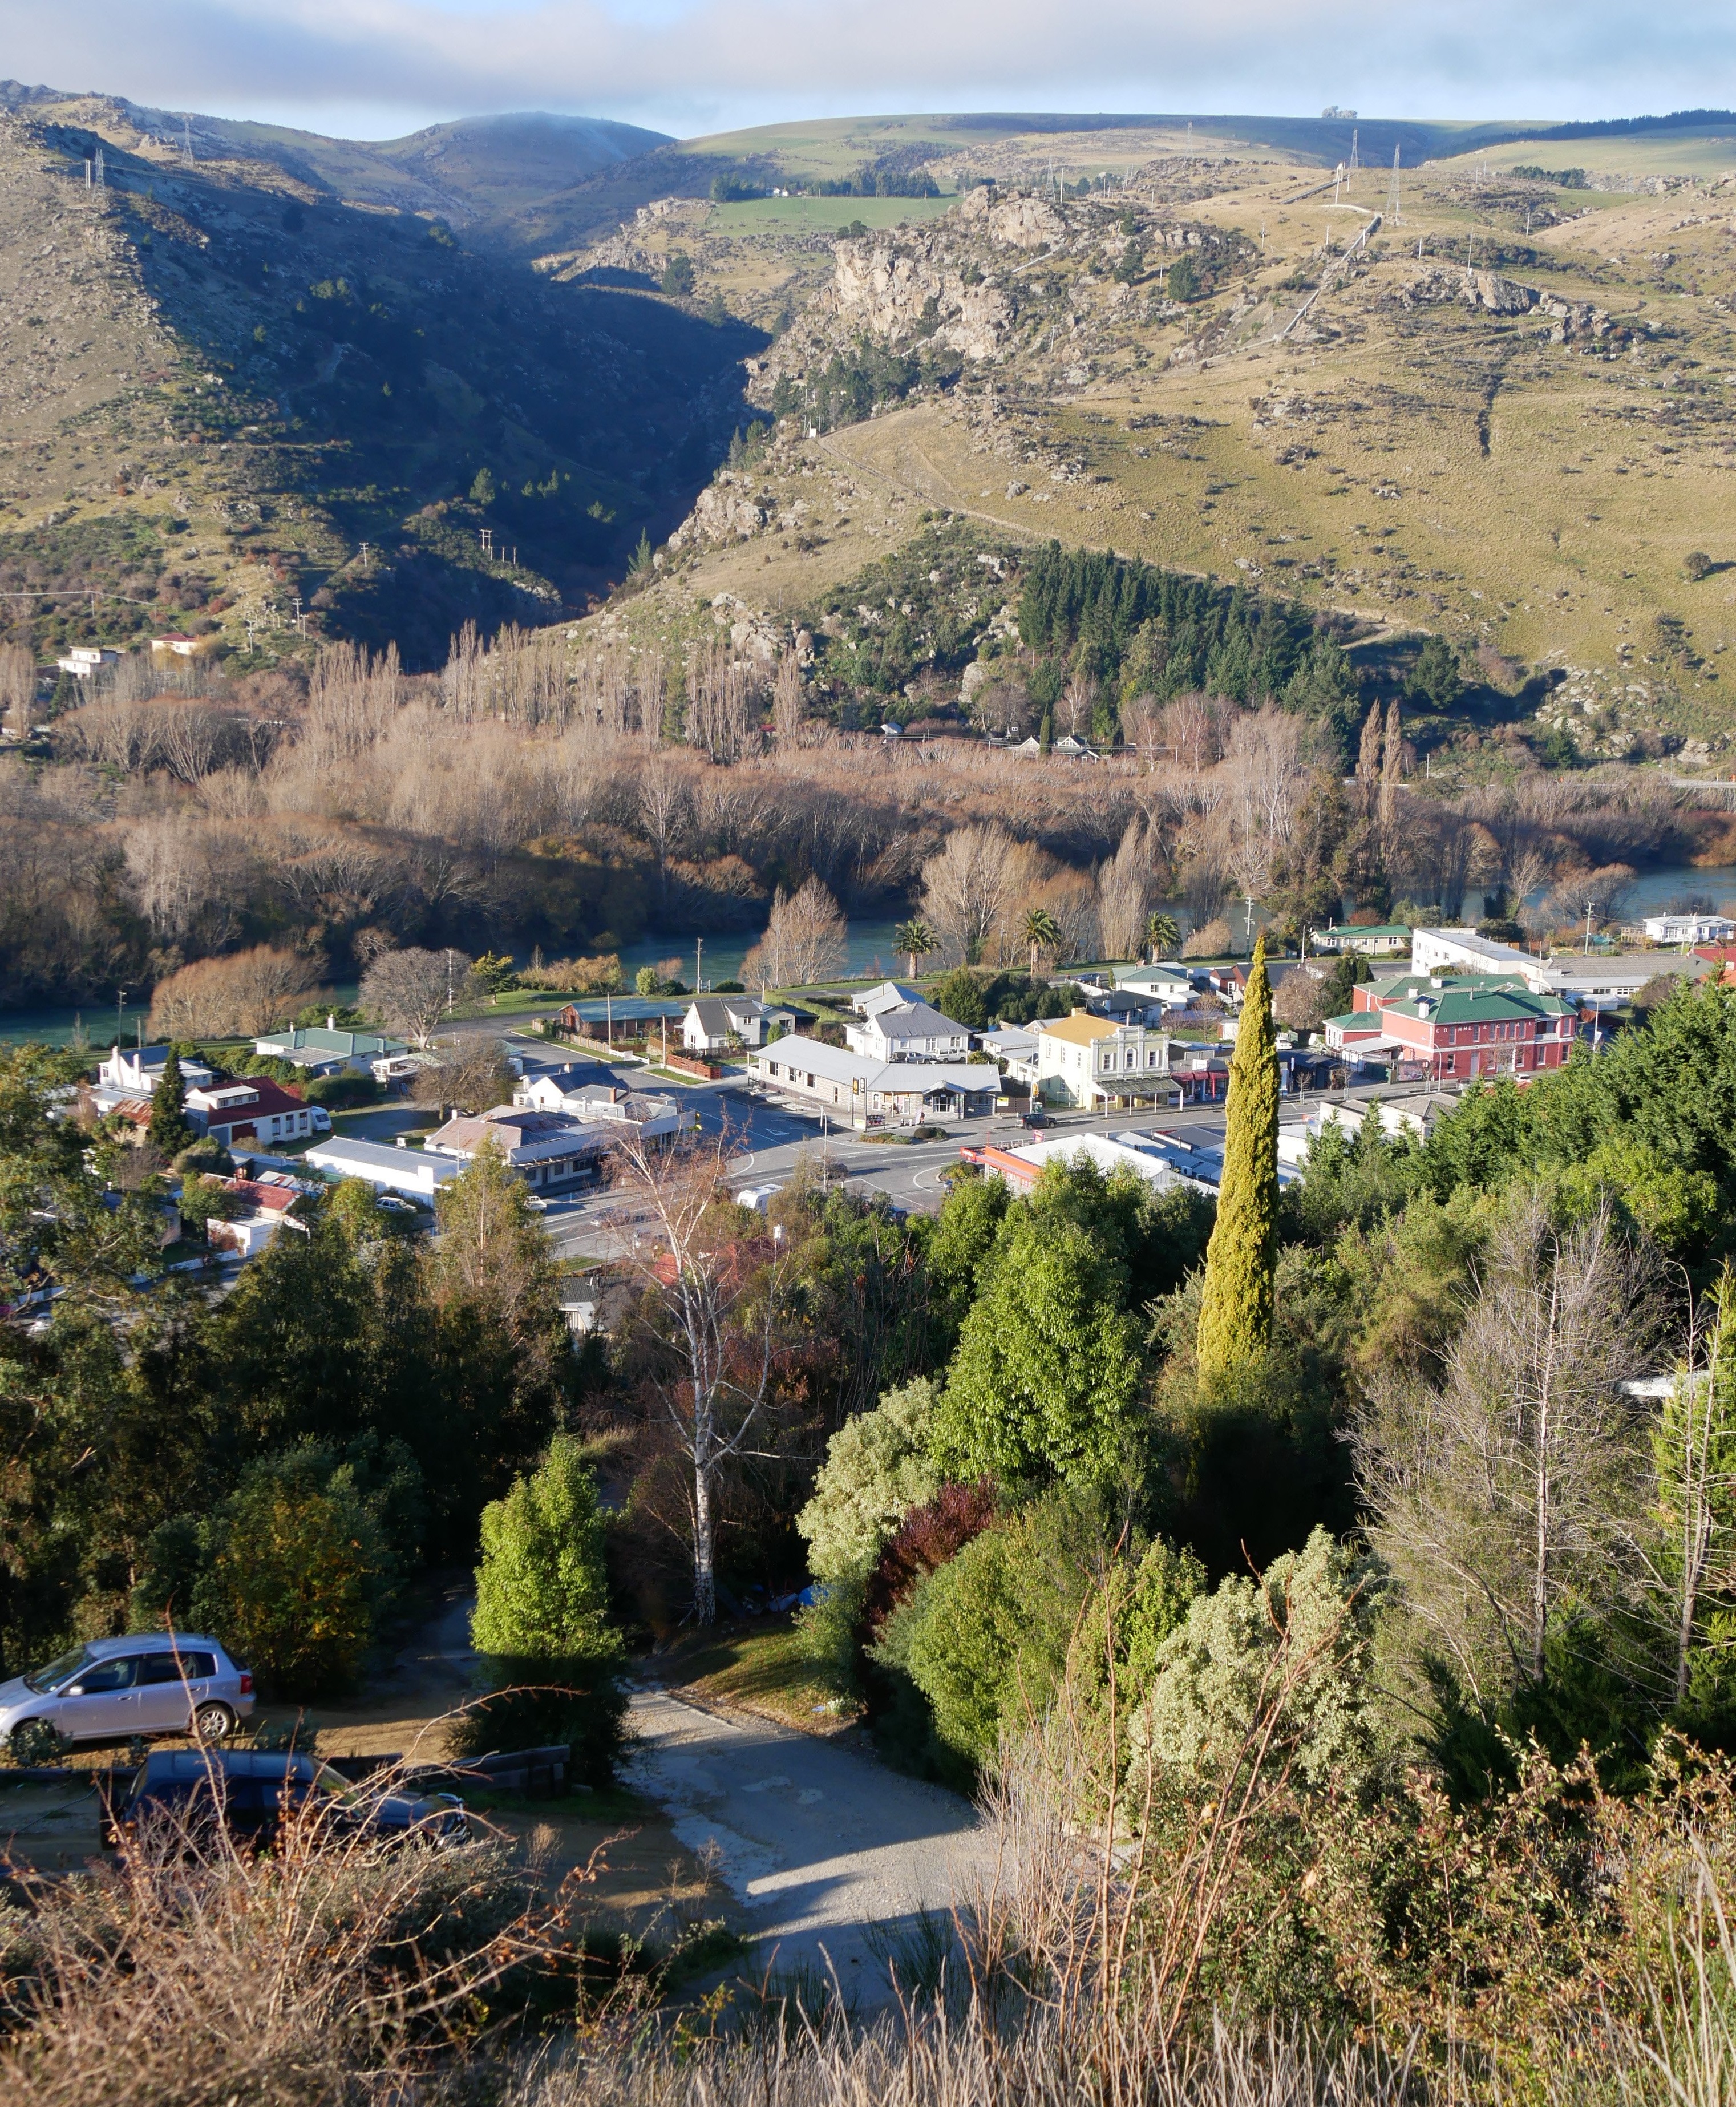 Roxburgh township is feeling the Central Otago property market boom. PHOTO: BRUCE MUNRO